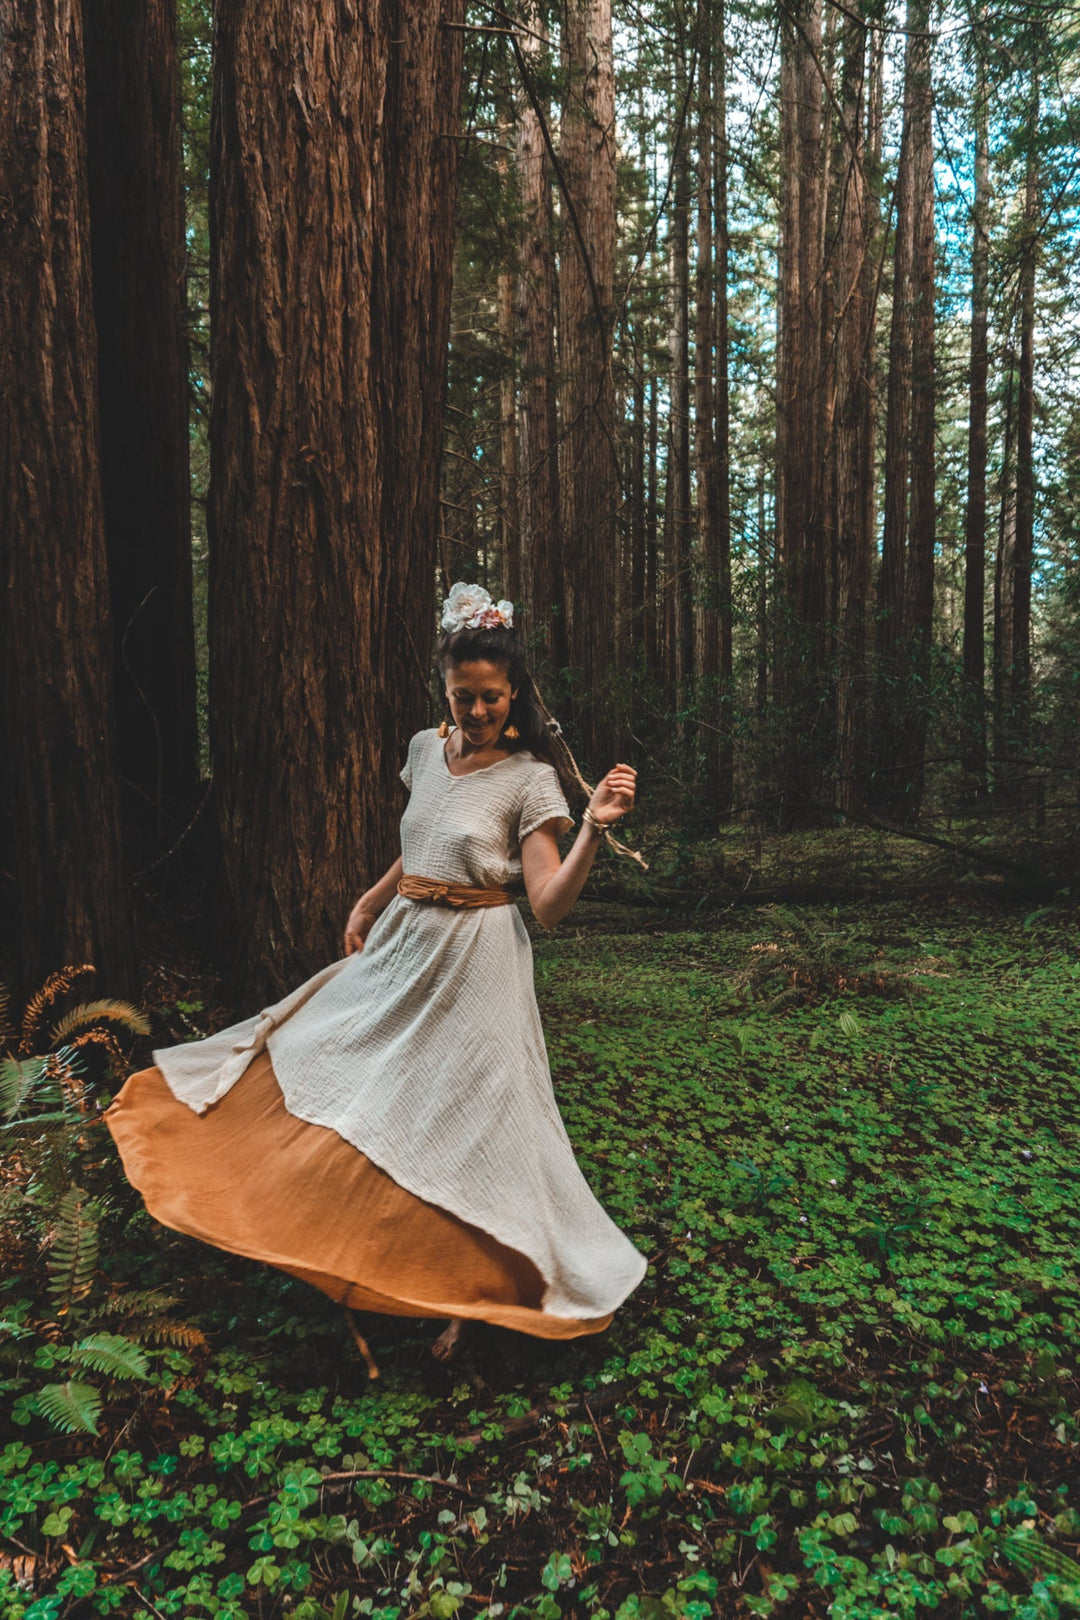 Model twirls in among trees wearing a long dress layered with even longer skirt. She has a belt at her waist.